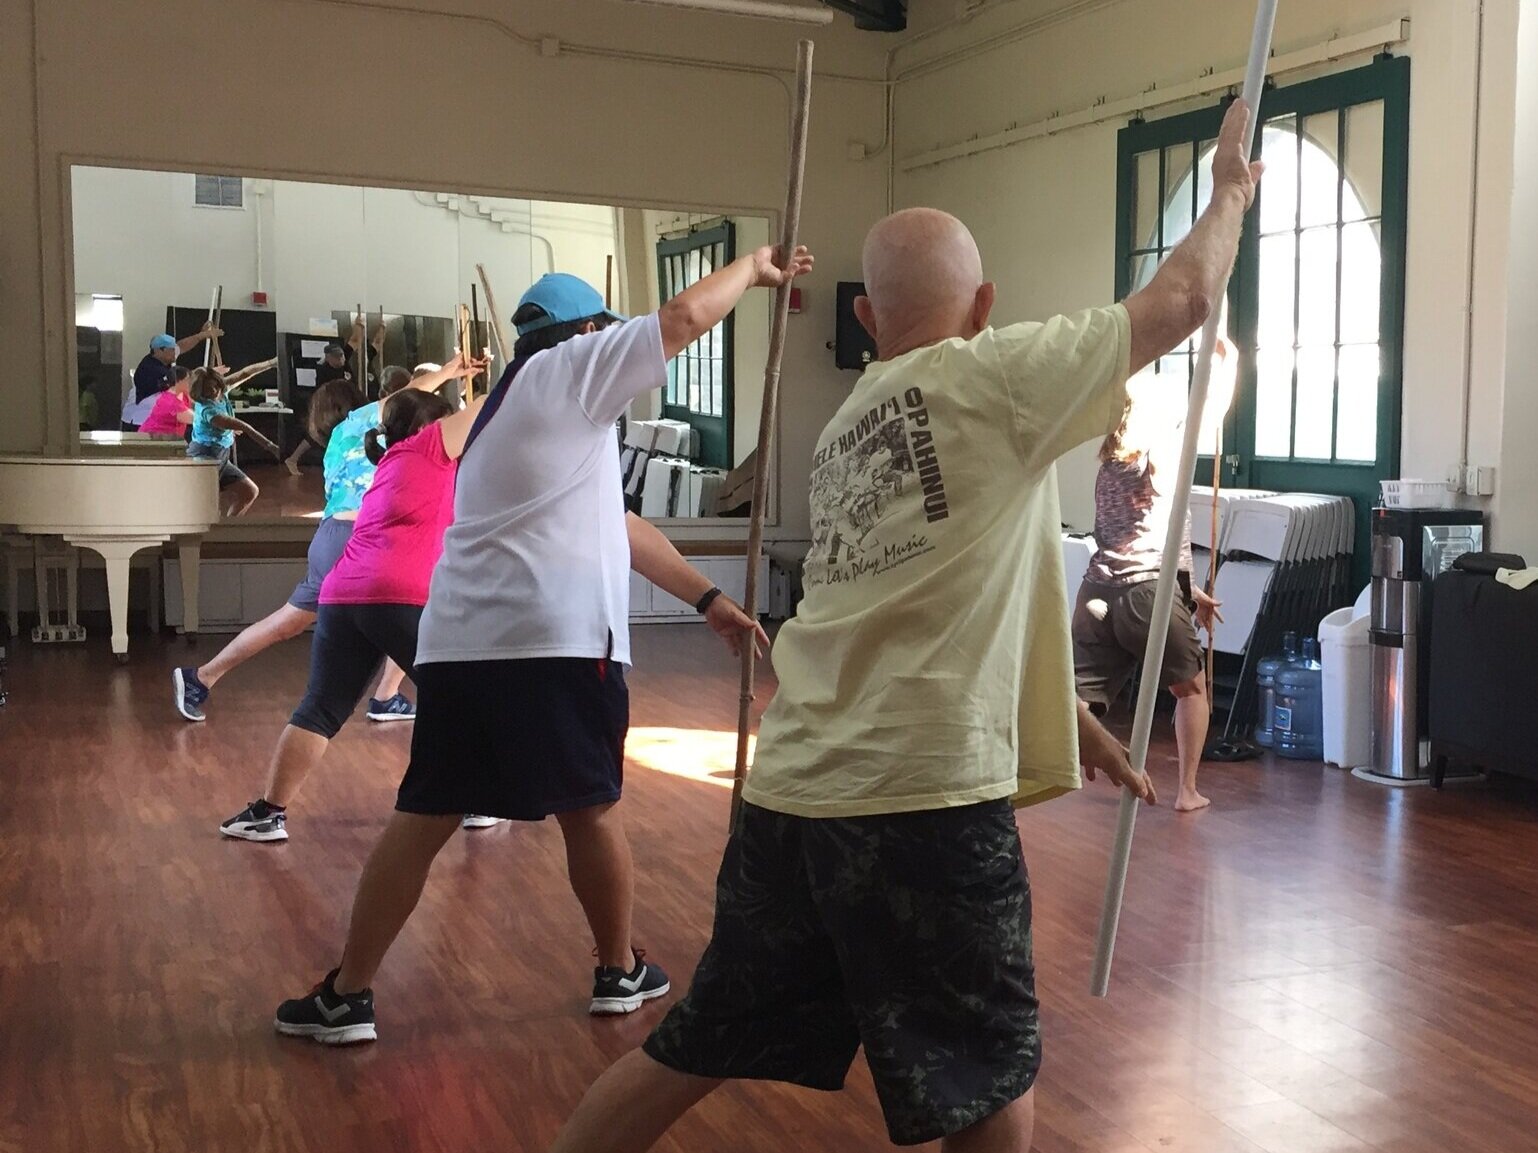  Qigong coordinates body-posture and movement, breathing, and meditation. This class is excellent for mindfulness and balance. 